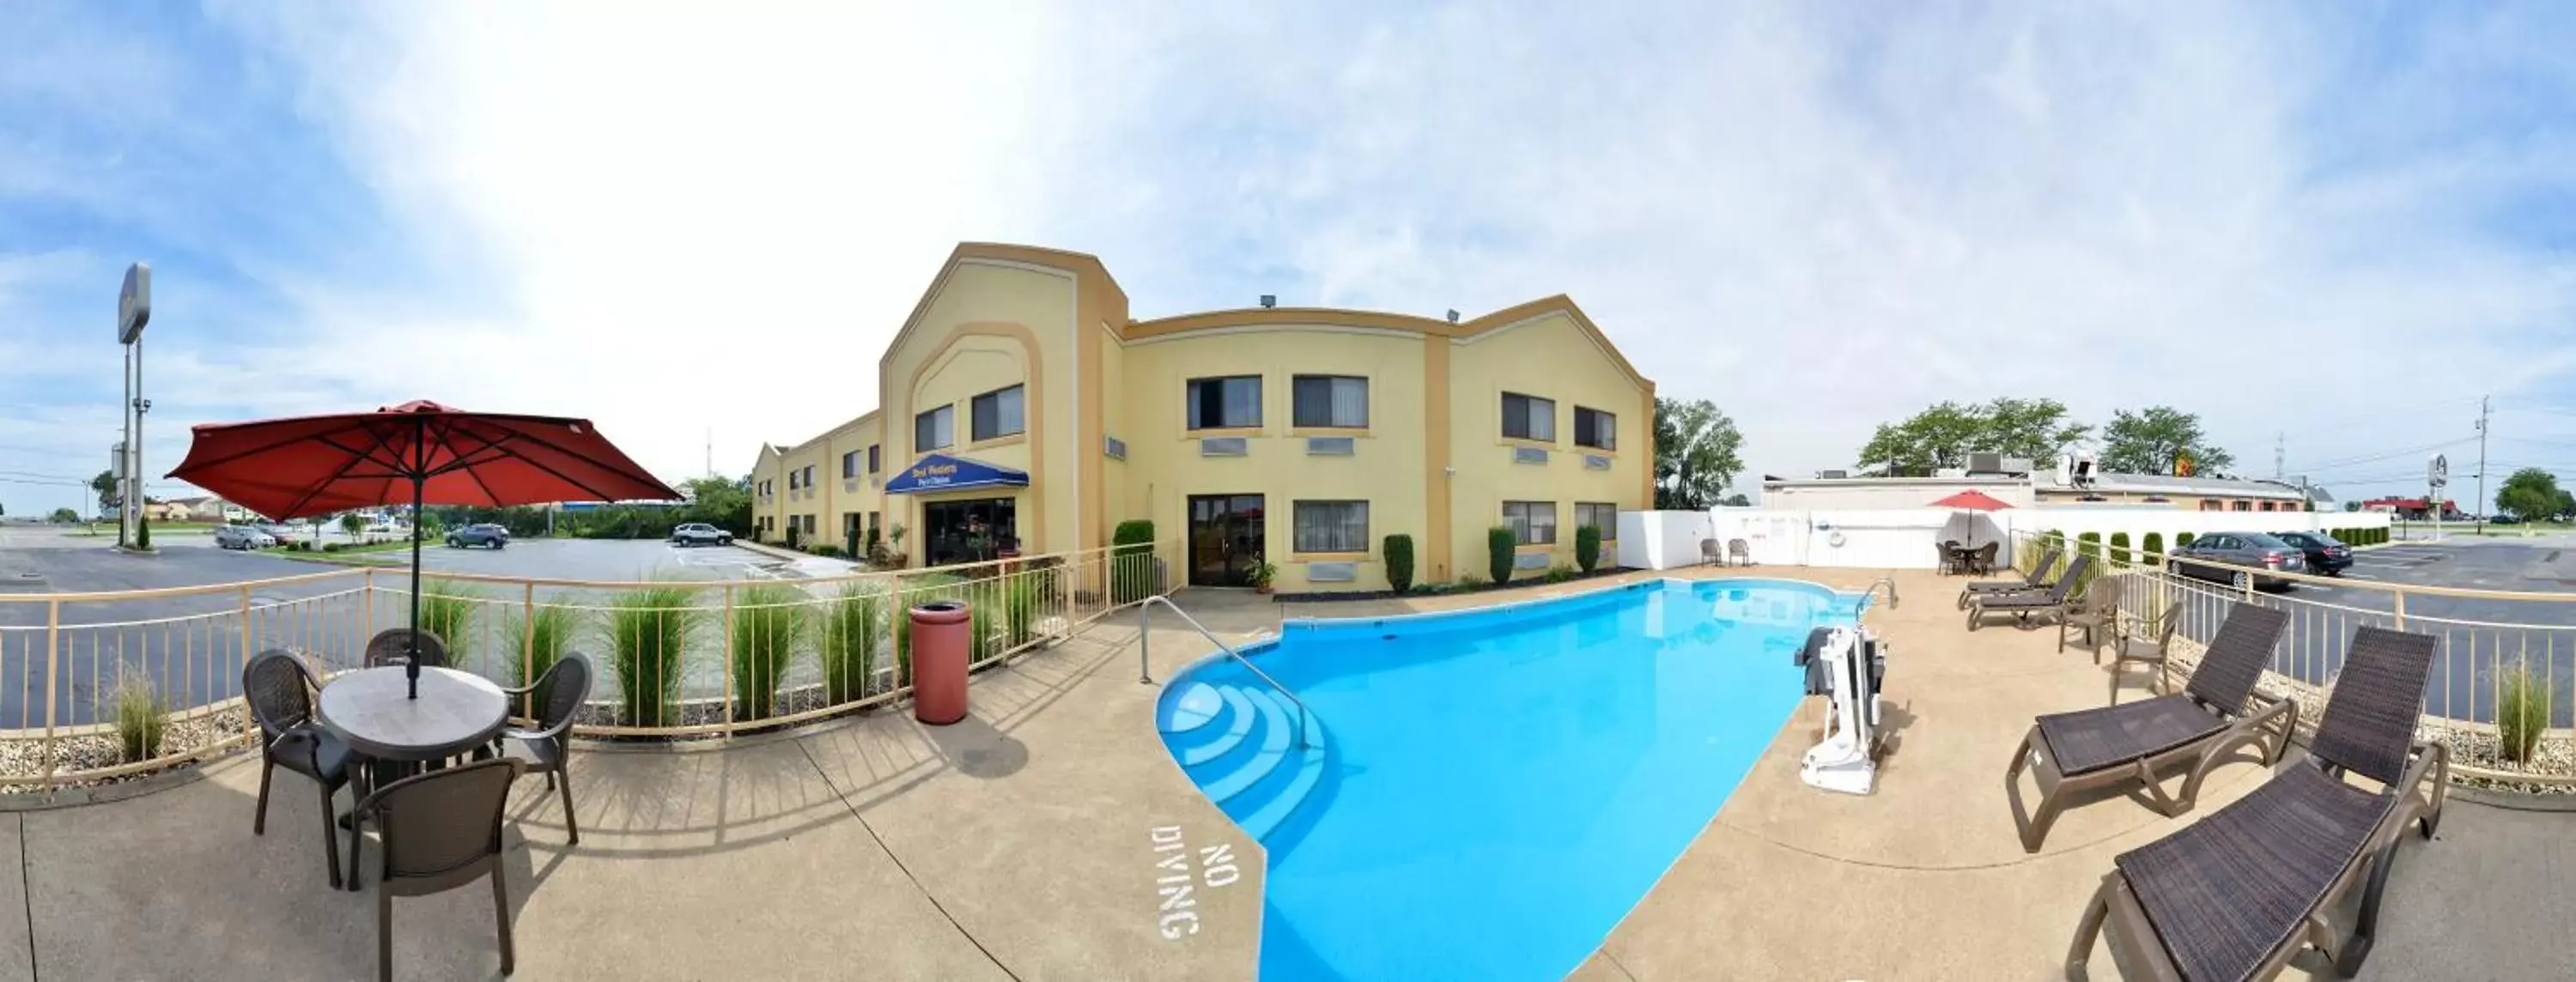 Property building, Swimming Pool in Best Western Port Clinton